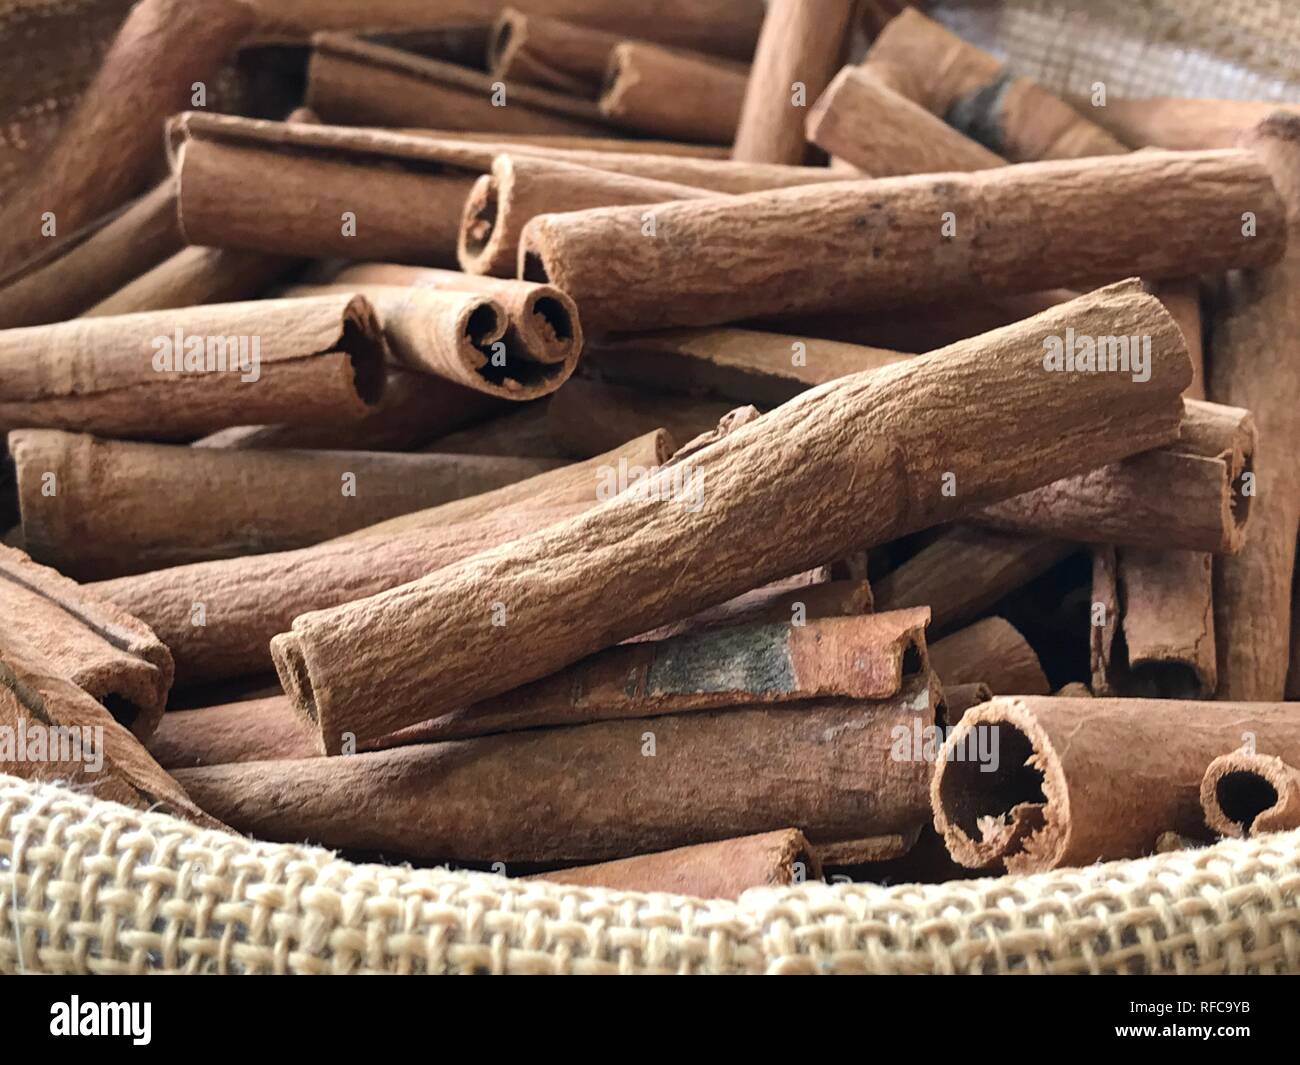 Cinnamon sticks in jute basket at the market close up brown background natural spices crop focus Stock Photo